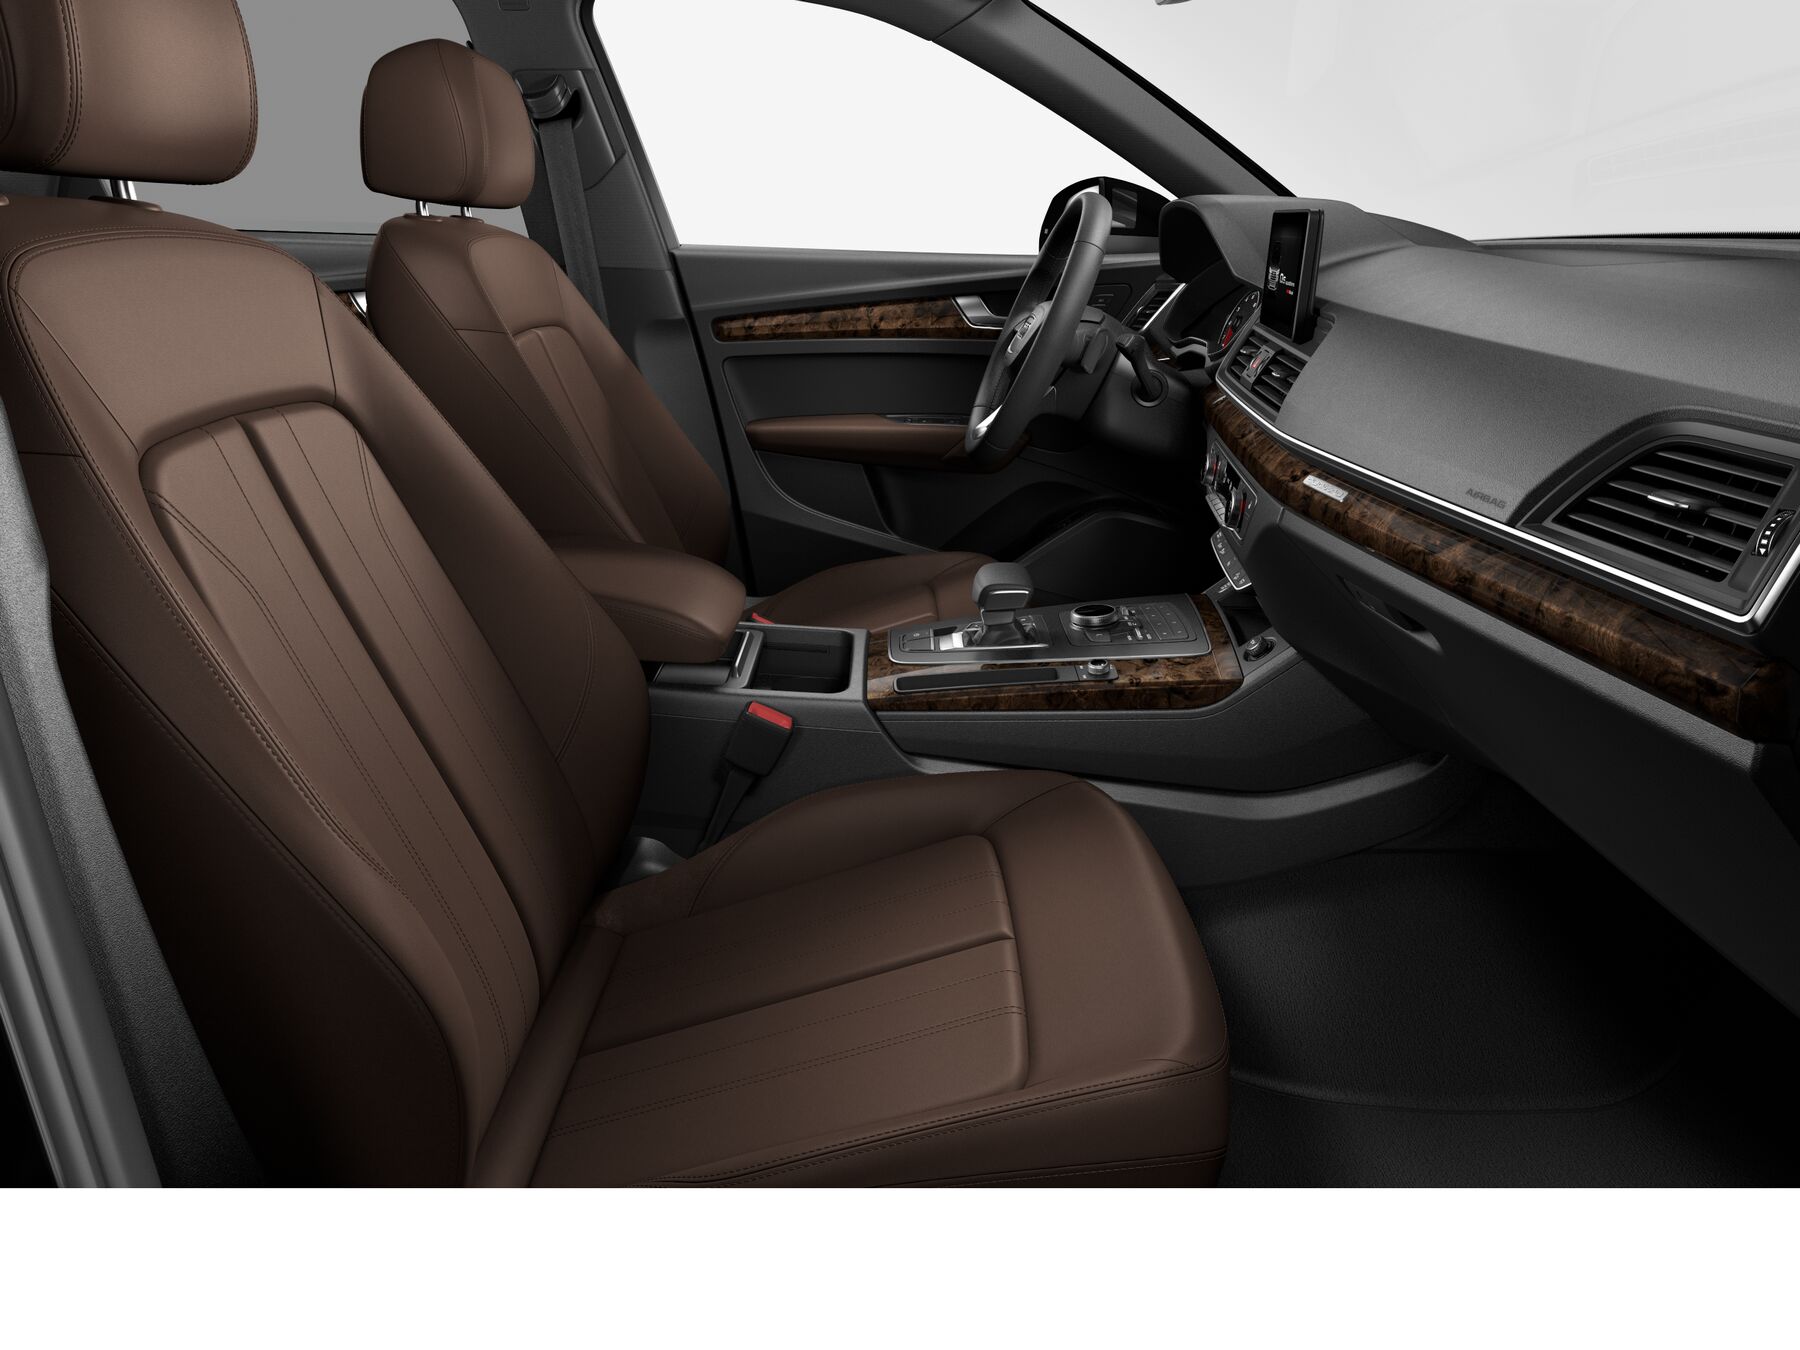 Audi Usa Website Nougat Brown Seat Pictures Are Deceptive